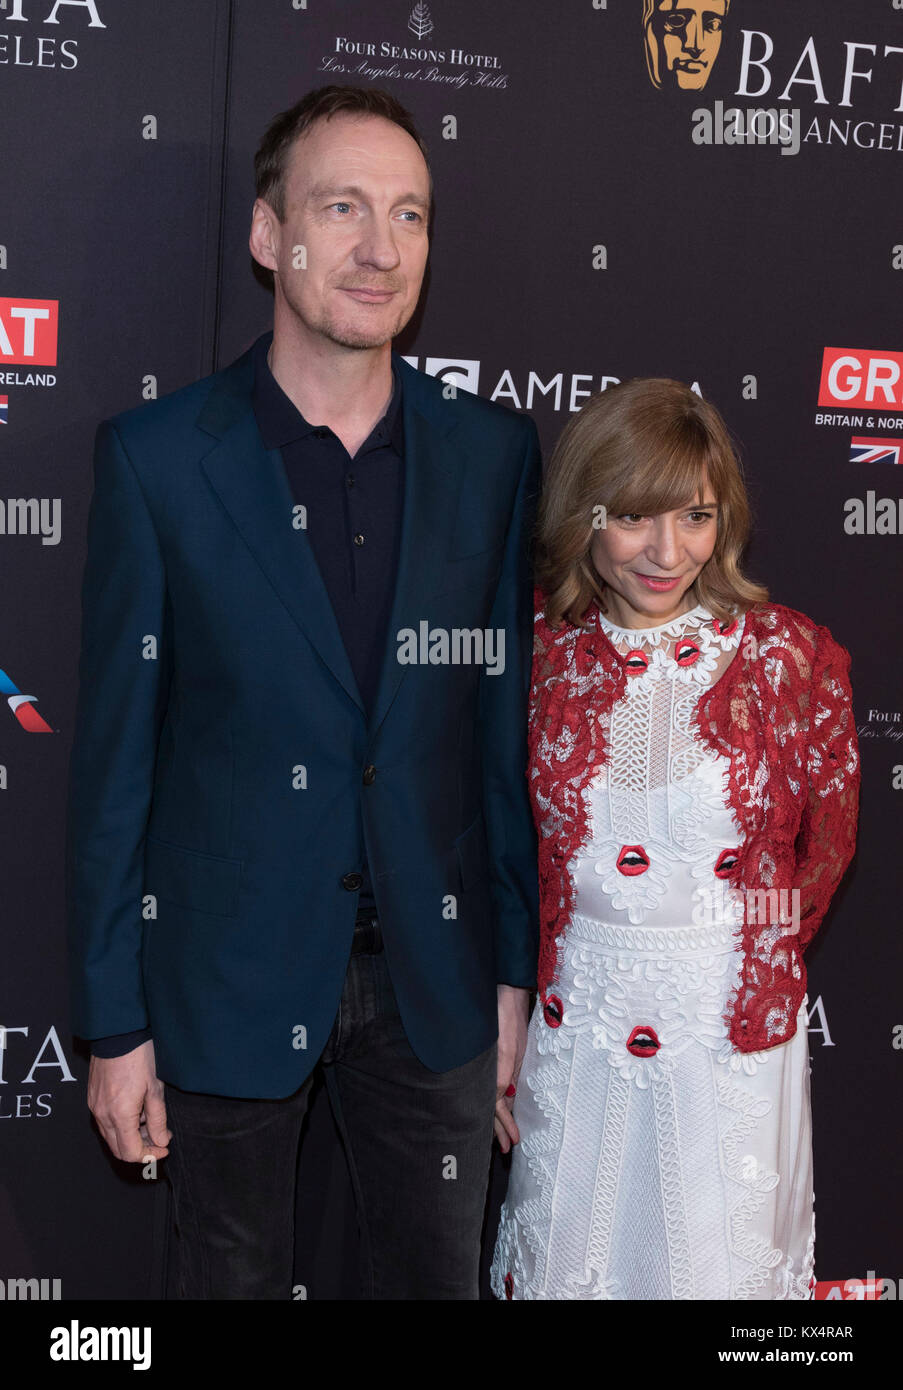 Los Angeles, USA. 06th Jan, 2018. David Thewlis and guest attend the BAFTA Los Angeles Awards Season Tea Party at Hotel Four Seasons in Beverly Hills, California, USA, on 06 January 2018. Credit: Hubert Boesl - NO WIRE SERVICE - Credit: Hubert Boesl/dpa/Alamy Live News Credit: dpa picture alliance/Alamy Live News Stock Photo